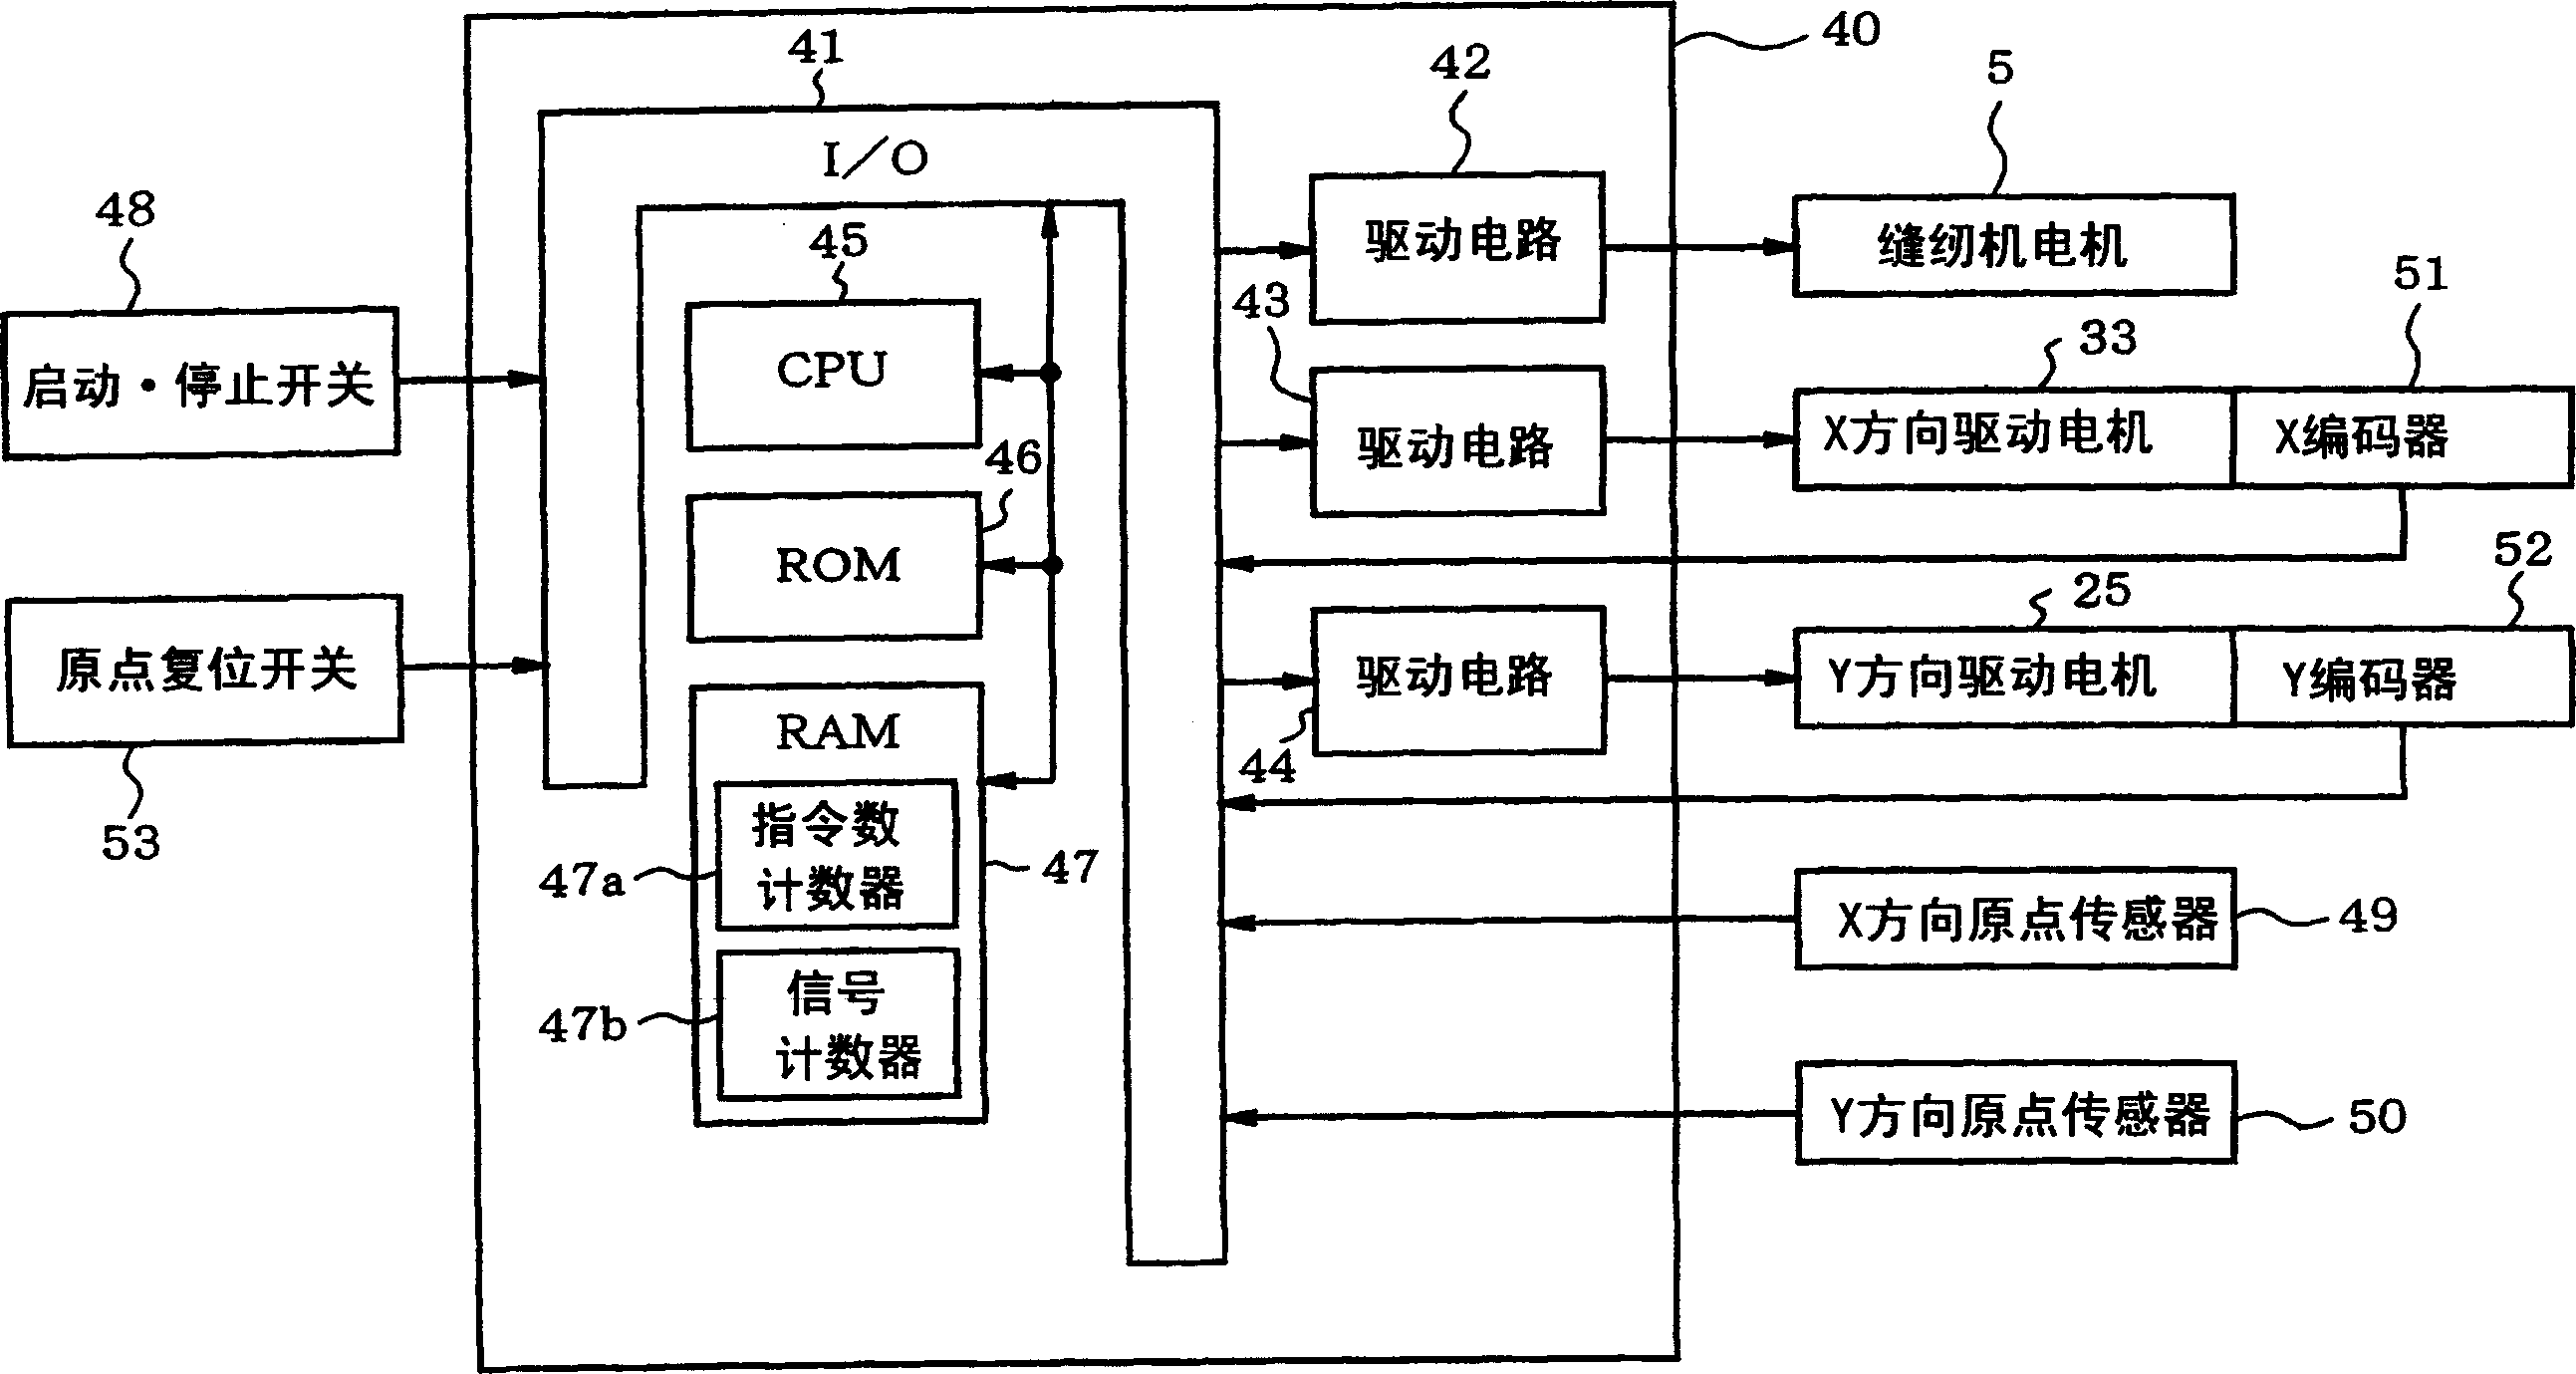 Drive control apparatus for magnetic stepping motor and sewing machine